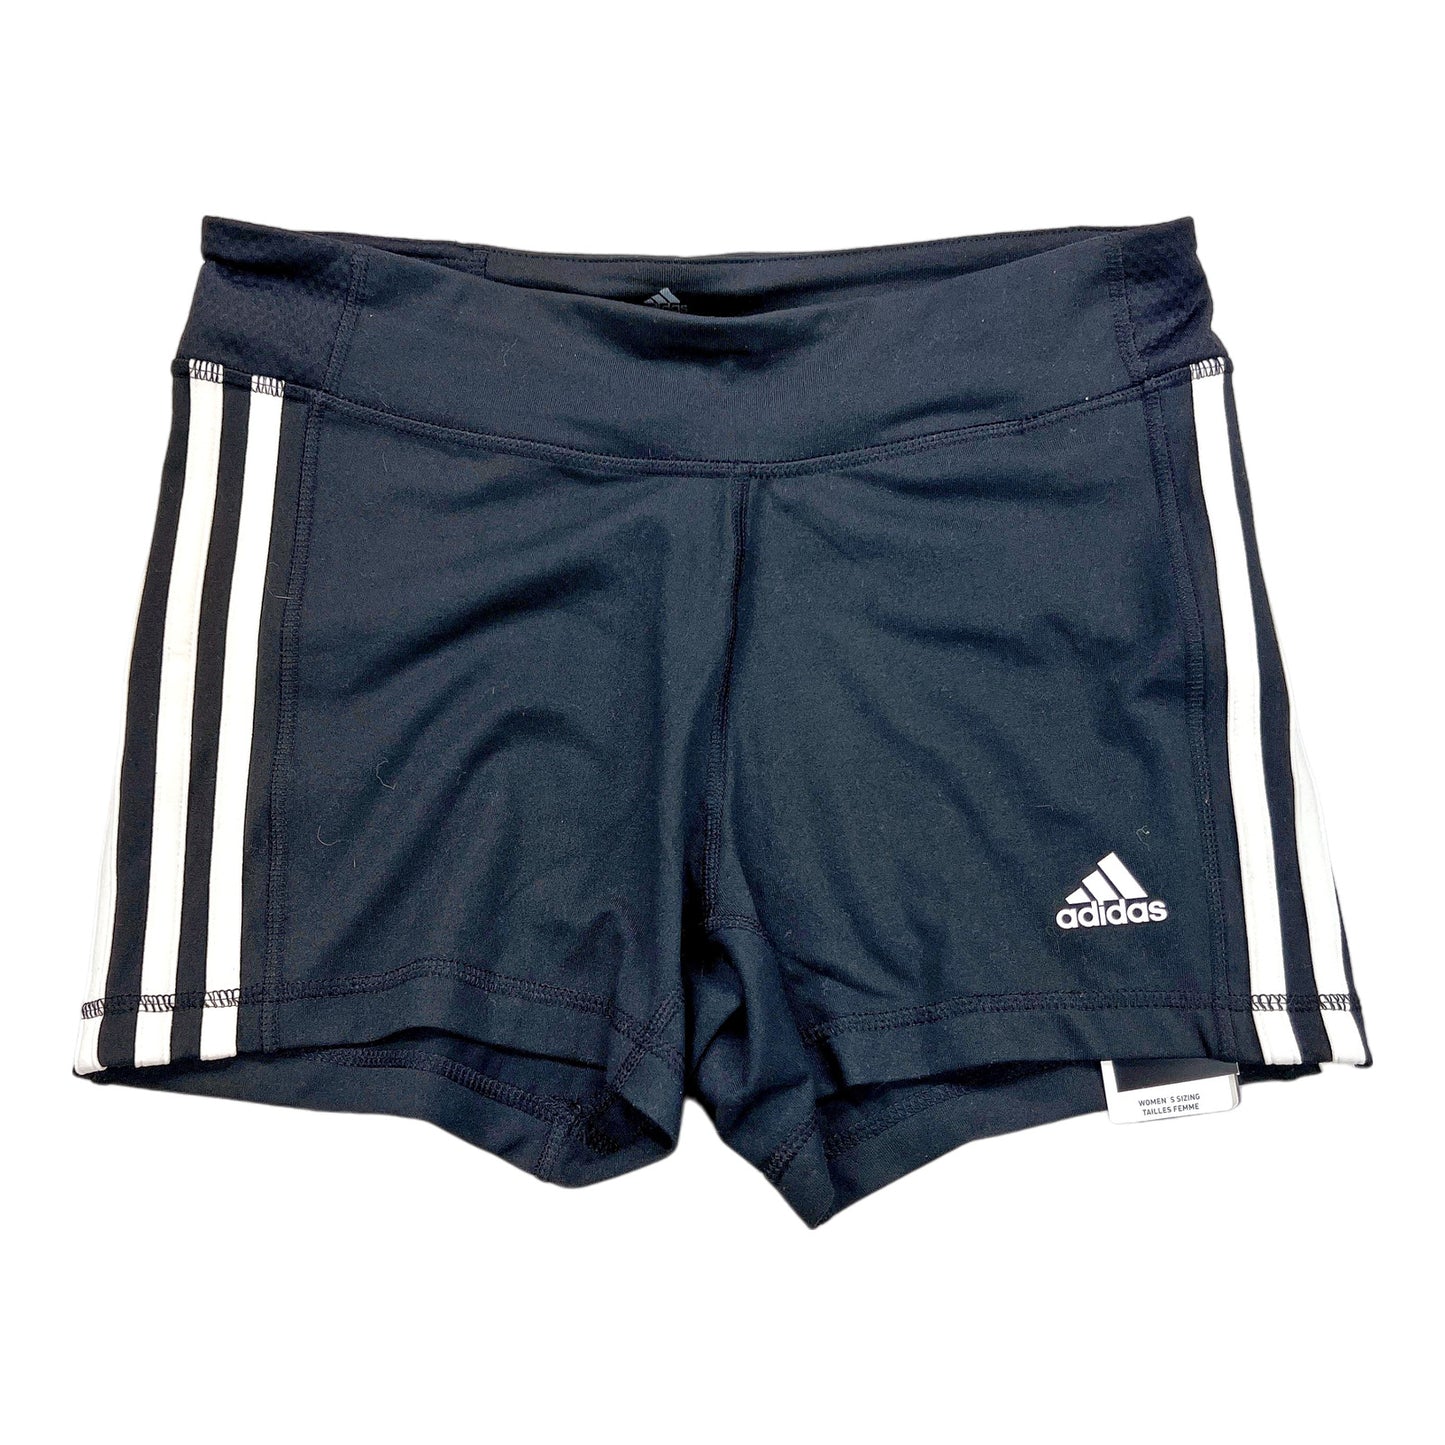 NEW adidas Women’s Black/White Striped Fitted Athletic Shorts - M